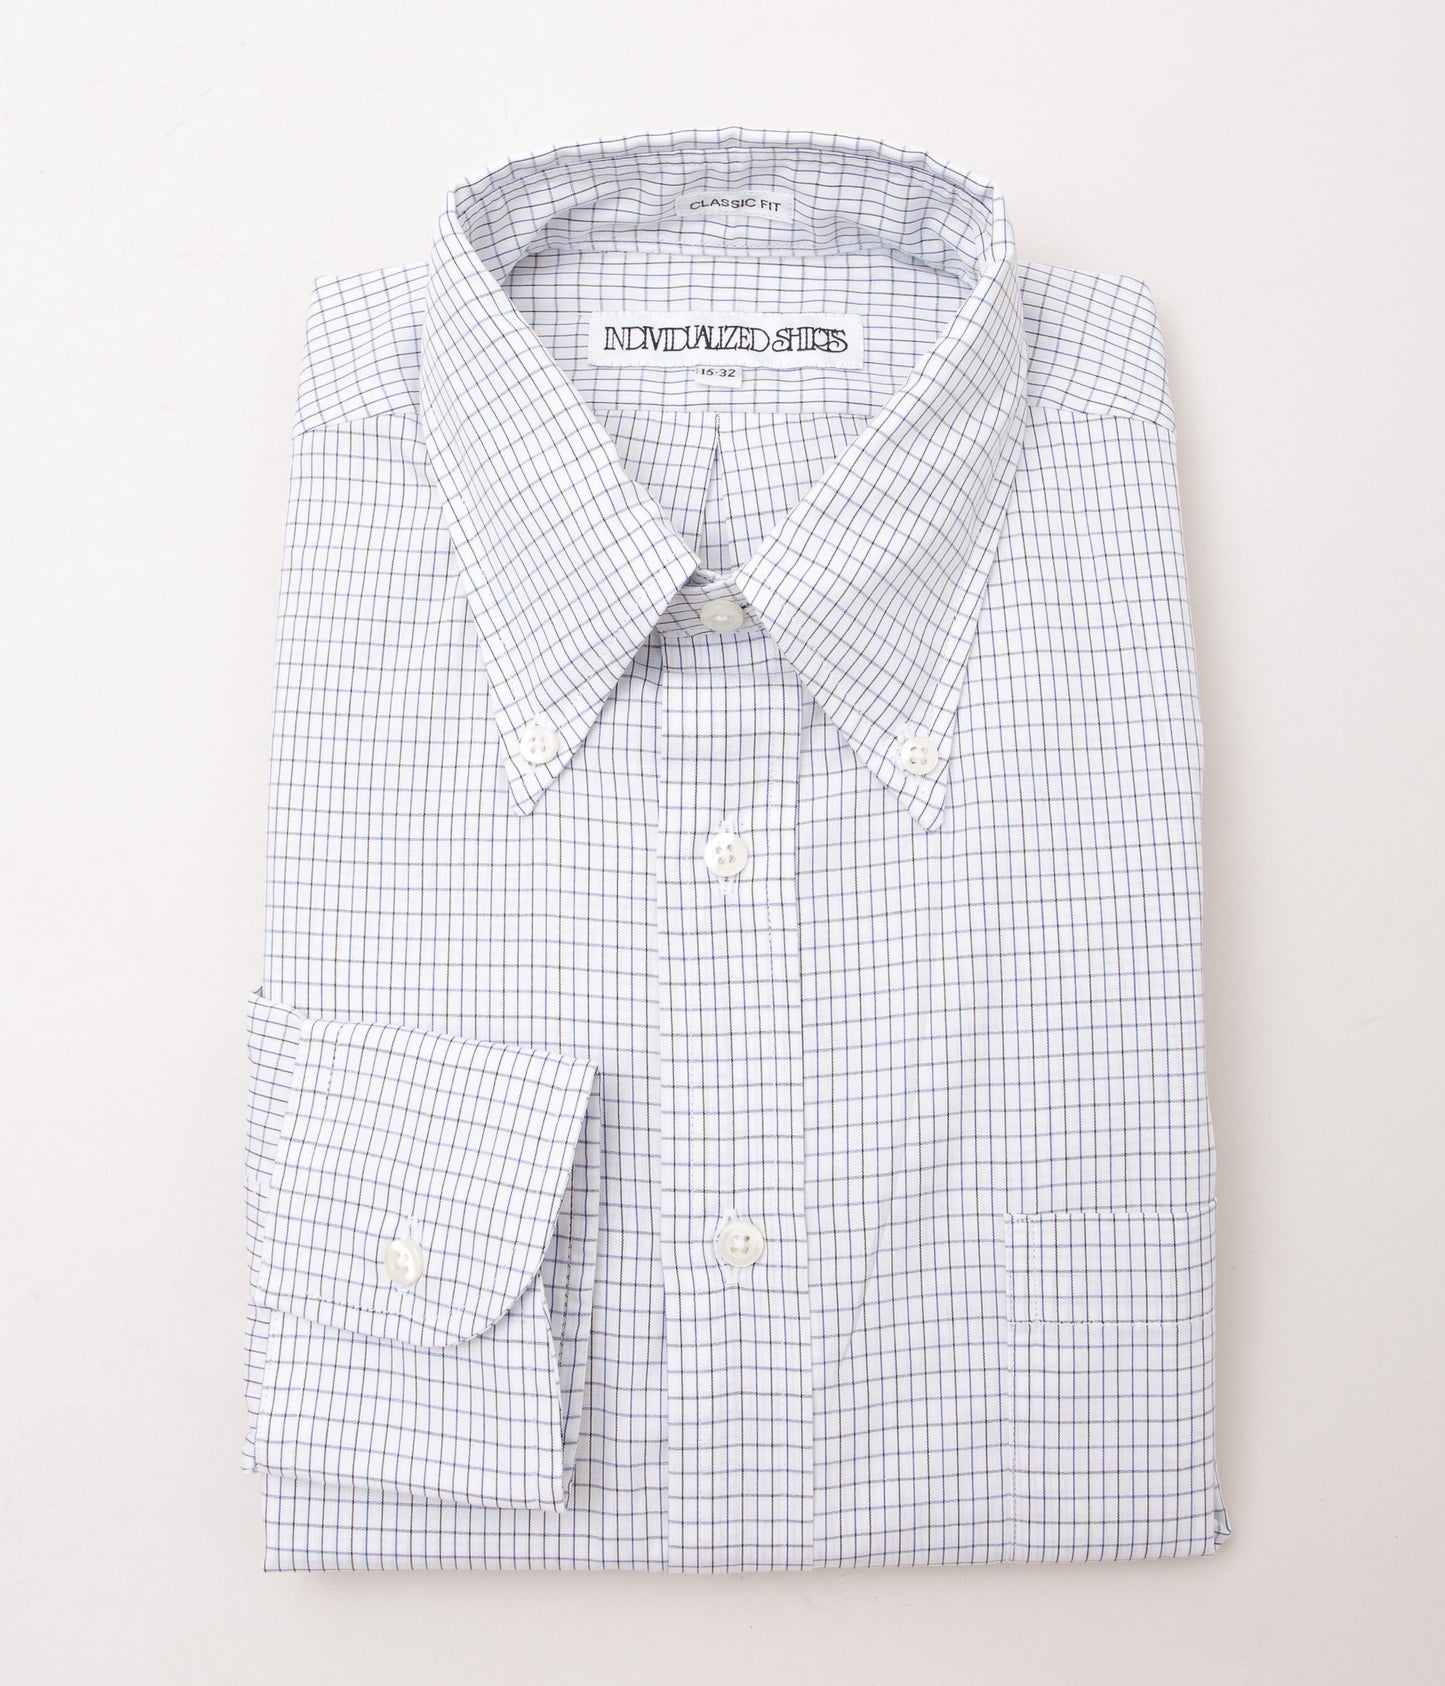 INDIVIDUALIZED SHIRTS "CLASSIC TATTERSALL (CLASSIC FIT BUTTON DOWN SHIRT)" (BLUE/BLACK)